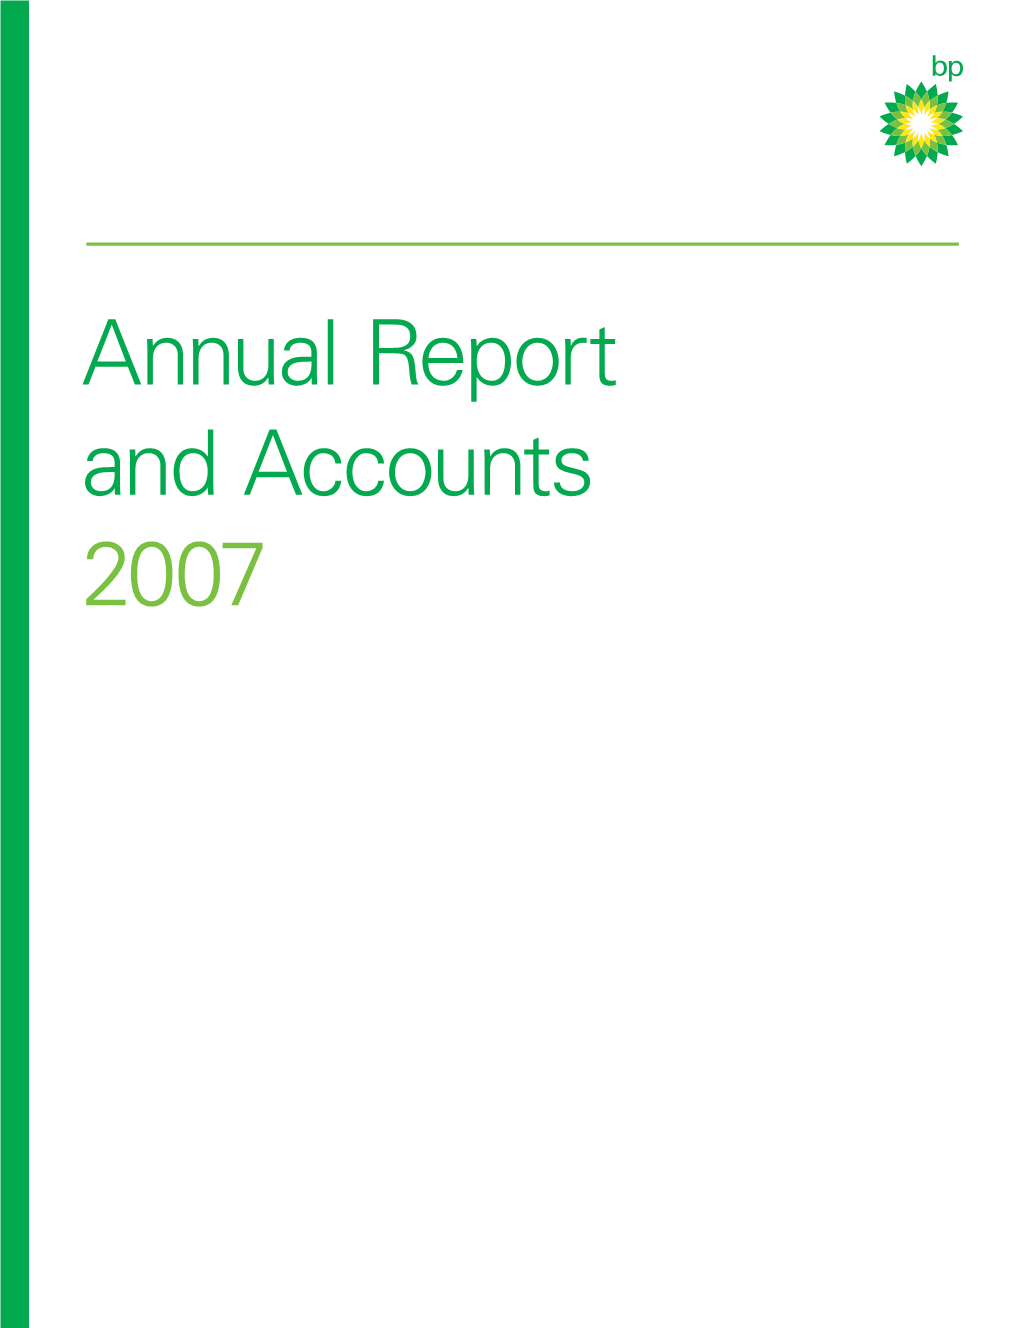 BP Annual Report and Accounts 2007 Accounts and Report Annual BP